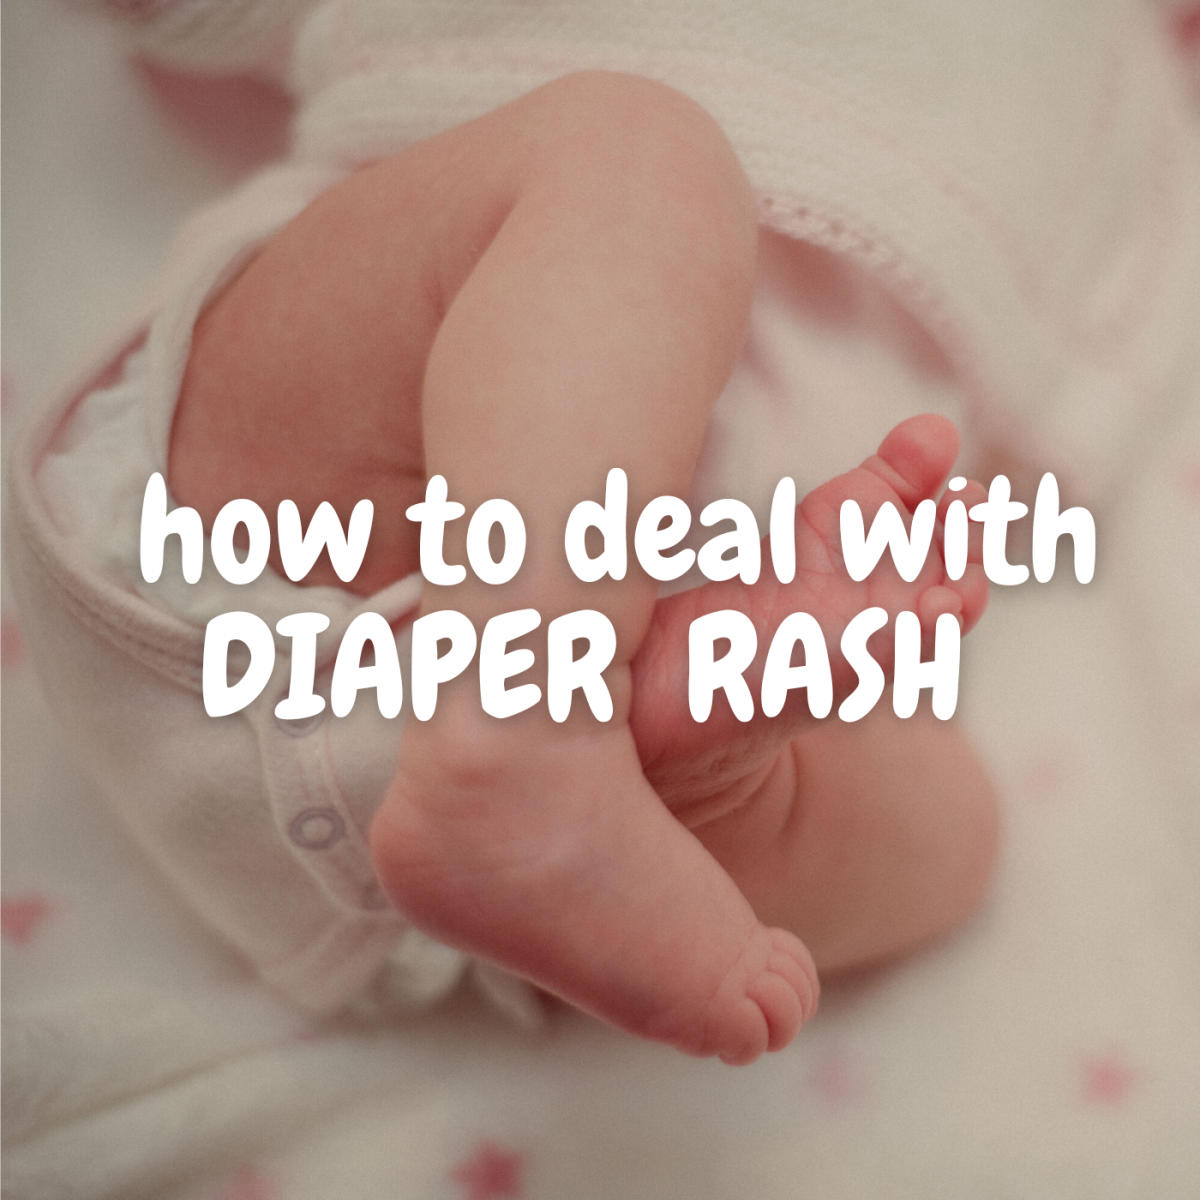 Most times diaper rash is uncomfortable for your baby but doesn't represent a risk to her health. However, it can be a sign of more serious conditions which parents should know about